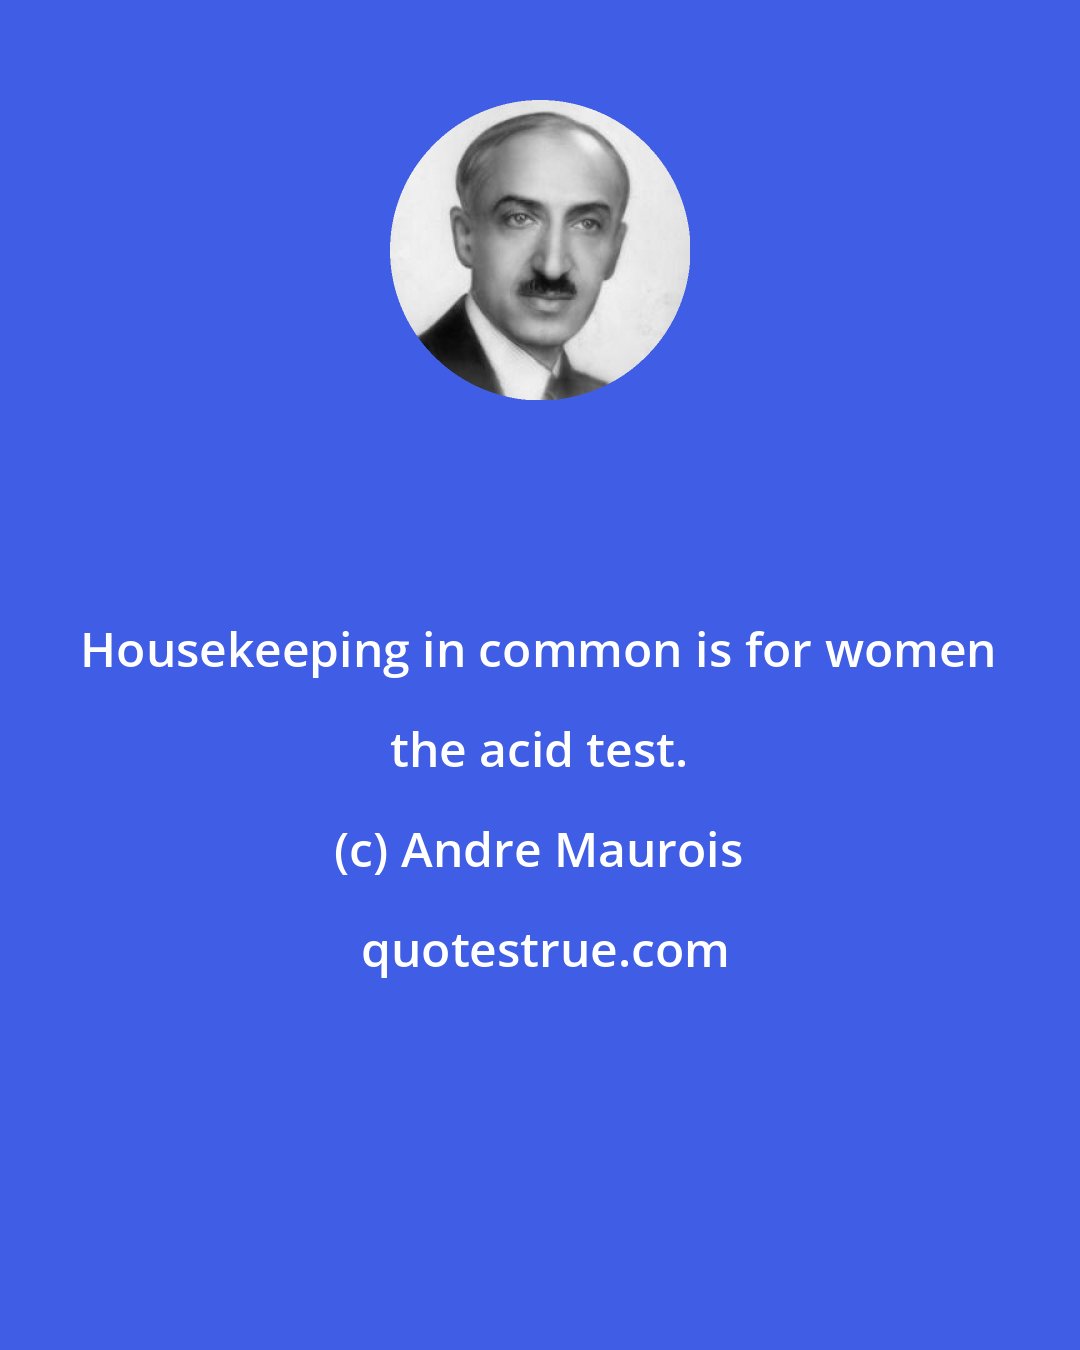 Andre Maurois: Housekeeping in common is for women the acid test.